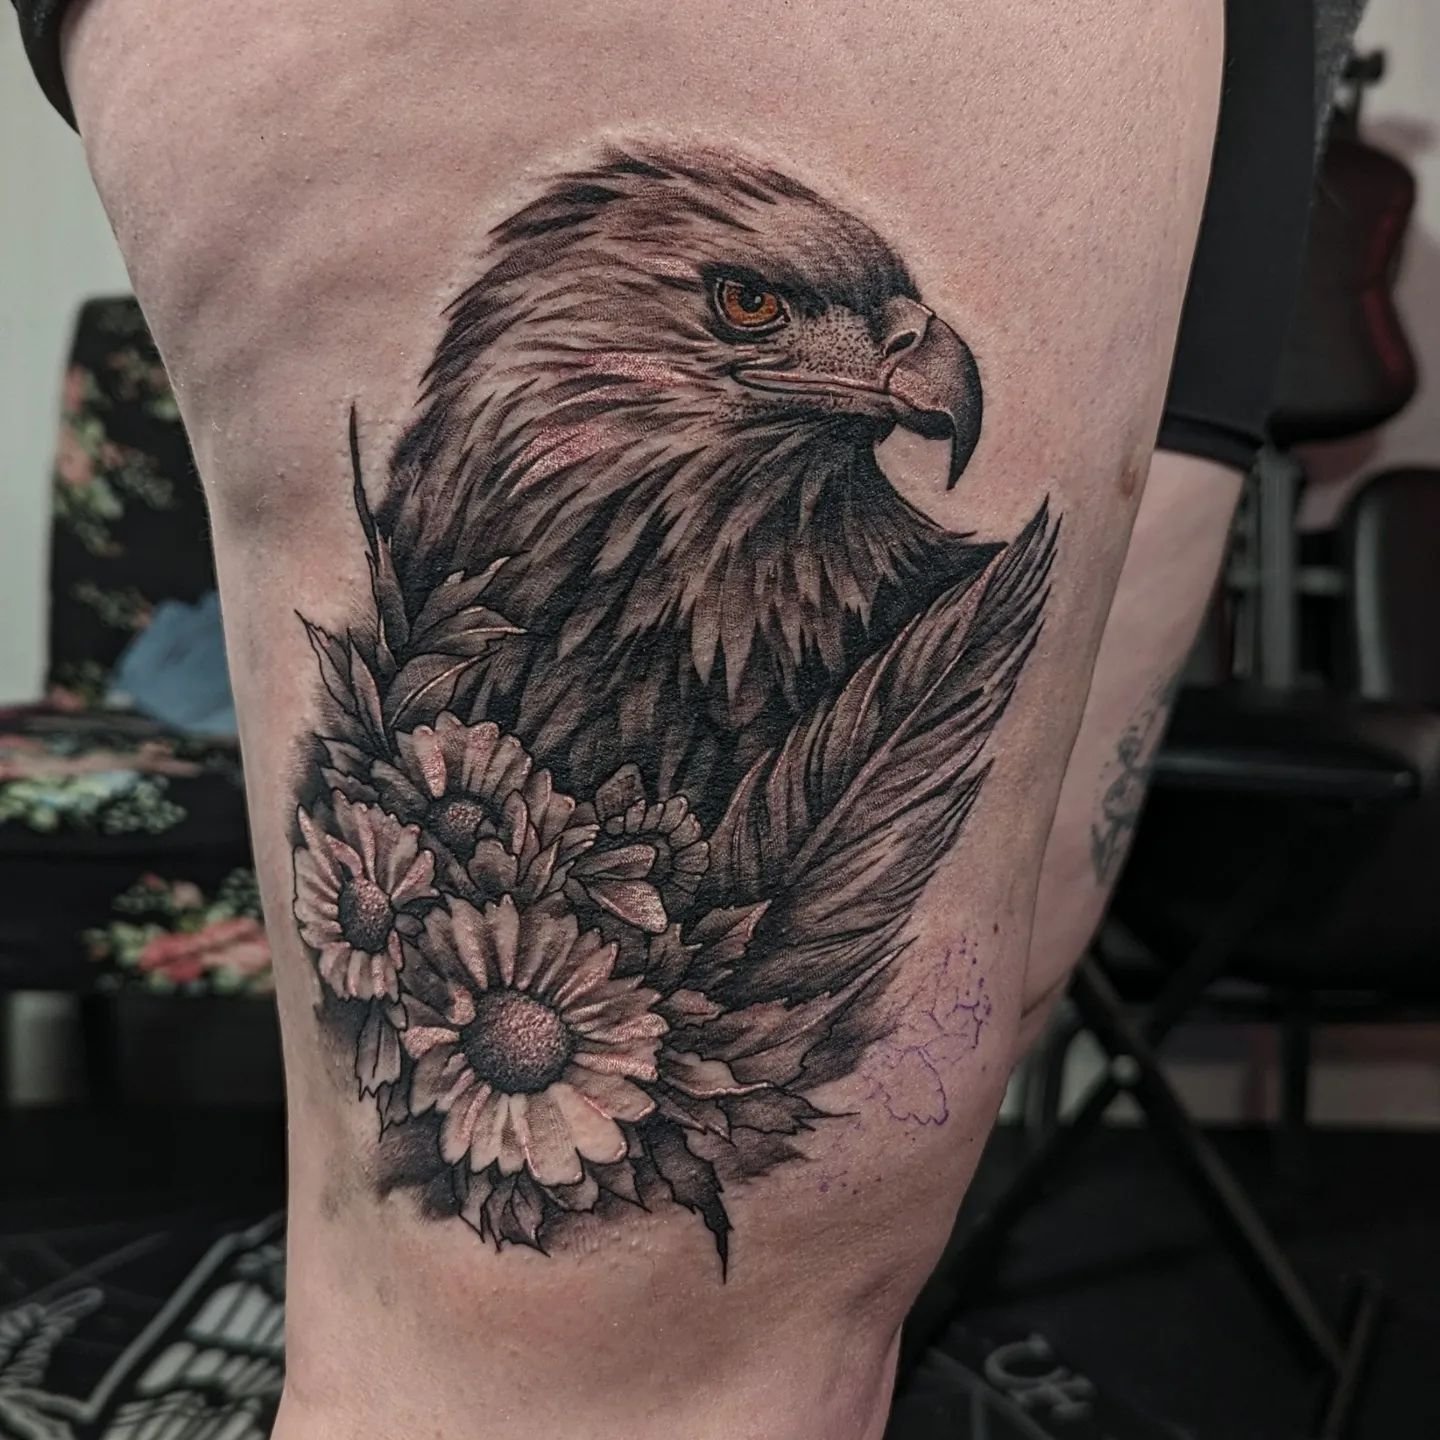 eagle from this mornin @pepax.official @radiantcolorsink @allegoryink @ttechofficial @masttattoo.official @dragonhawkofficial @biotat_ @tattooproton @mapletattoosupply @eikondevice @rotaryworks